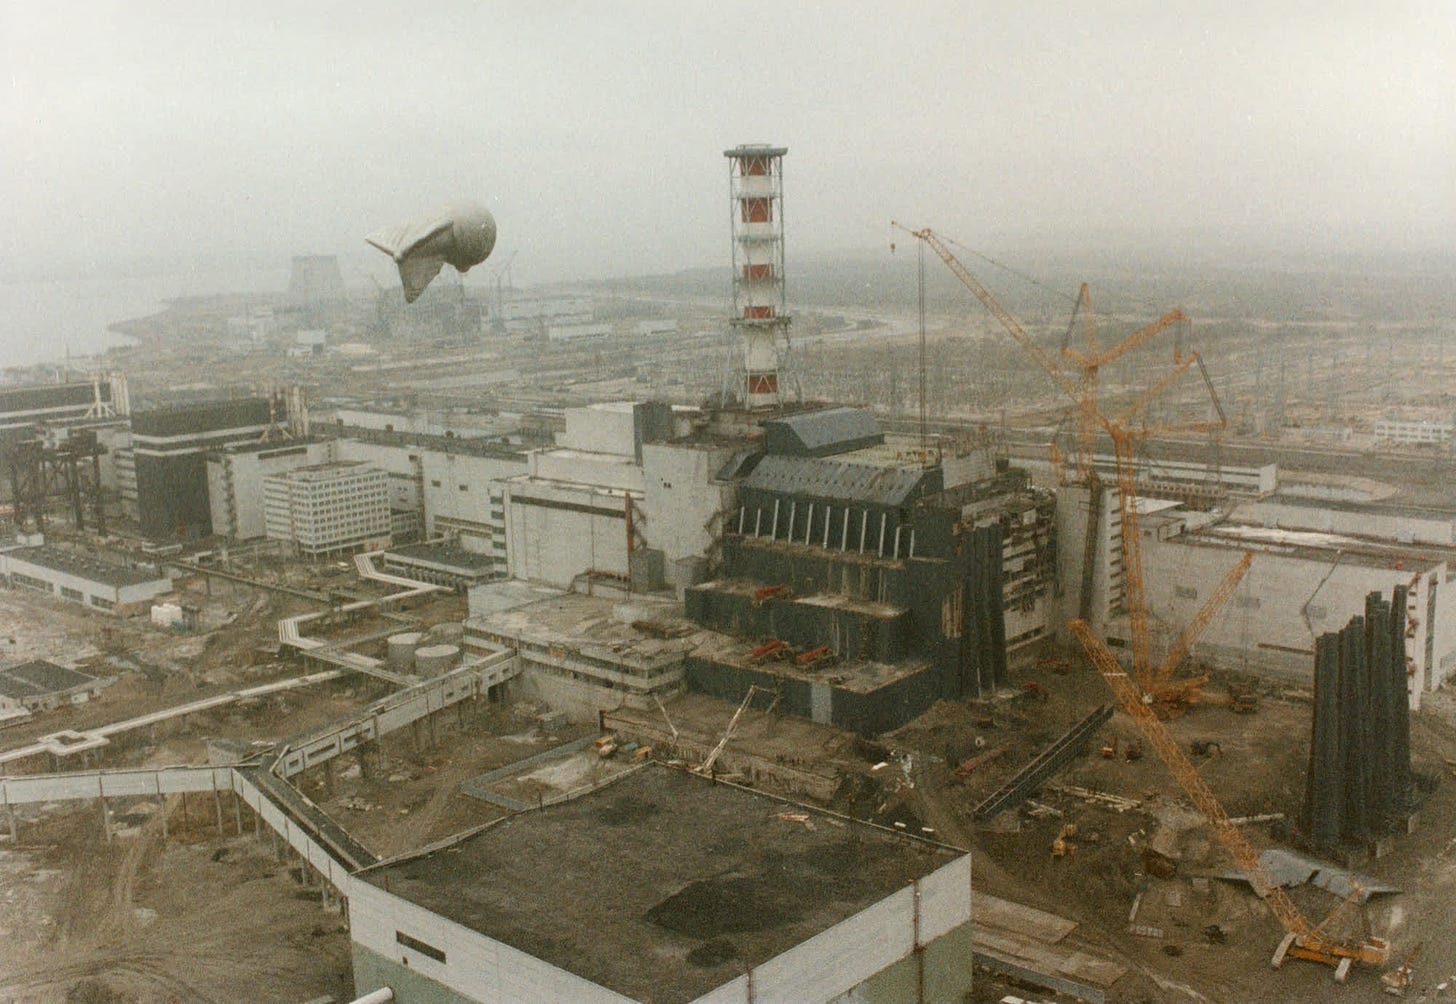 Opinion: Thirty-six years after Chernobyl, Russia is still keeping us in  the dark